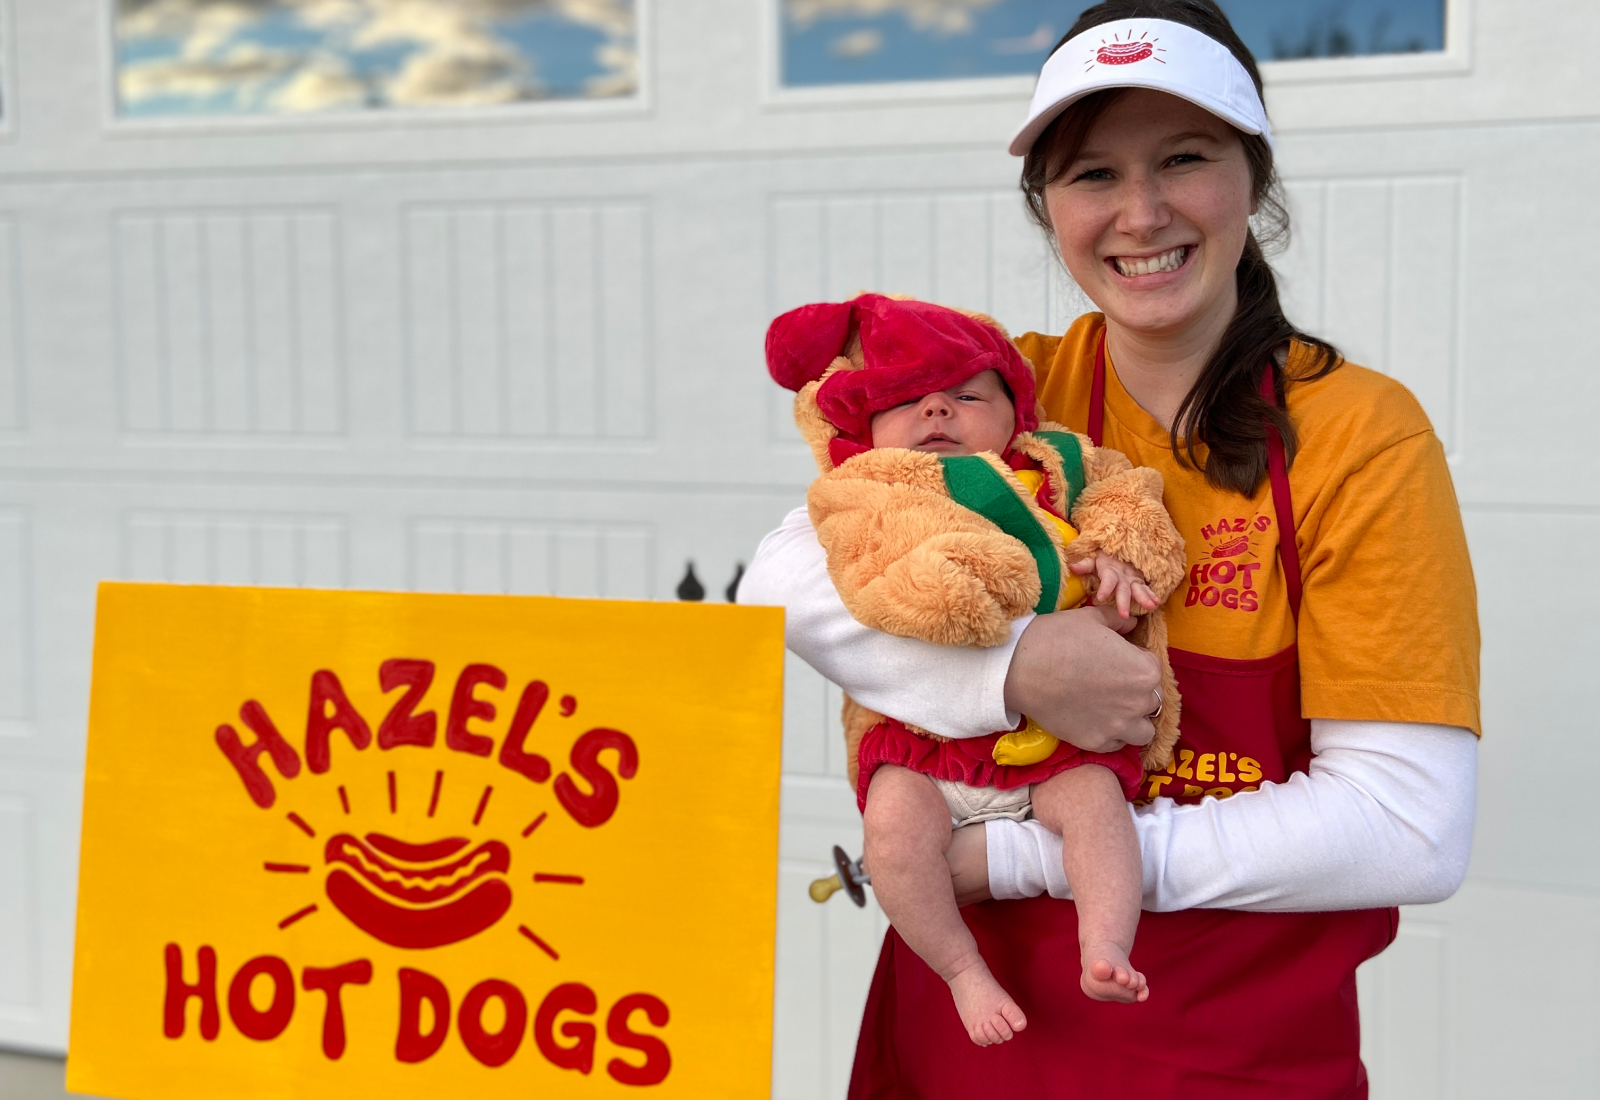 Hazel and her Hot Dog Stand | Hazel's Hot Dogs